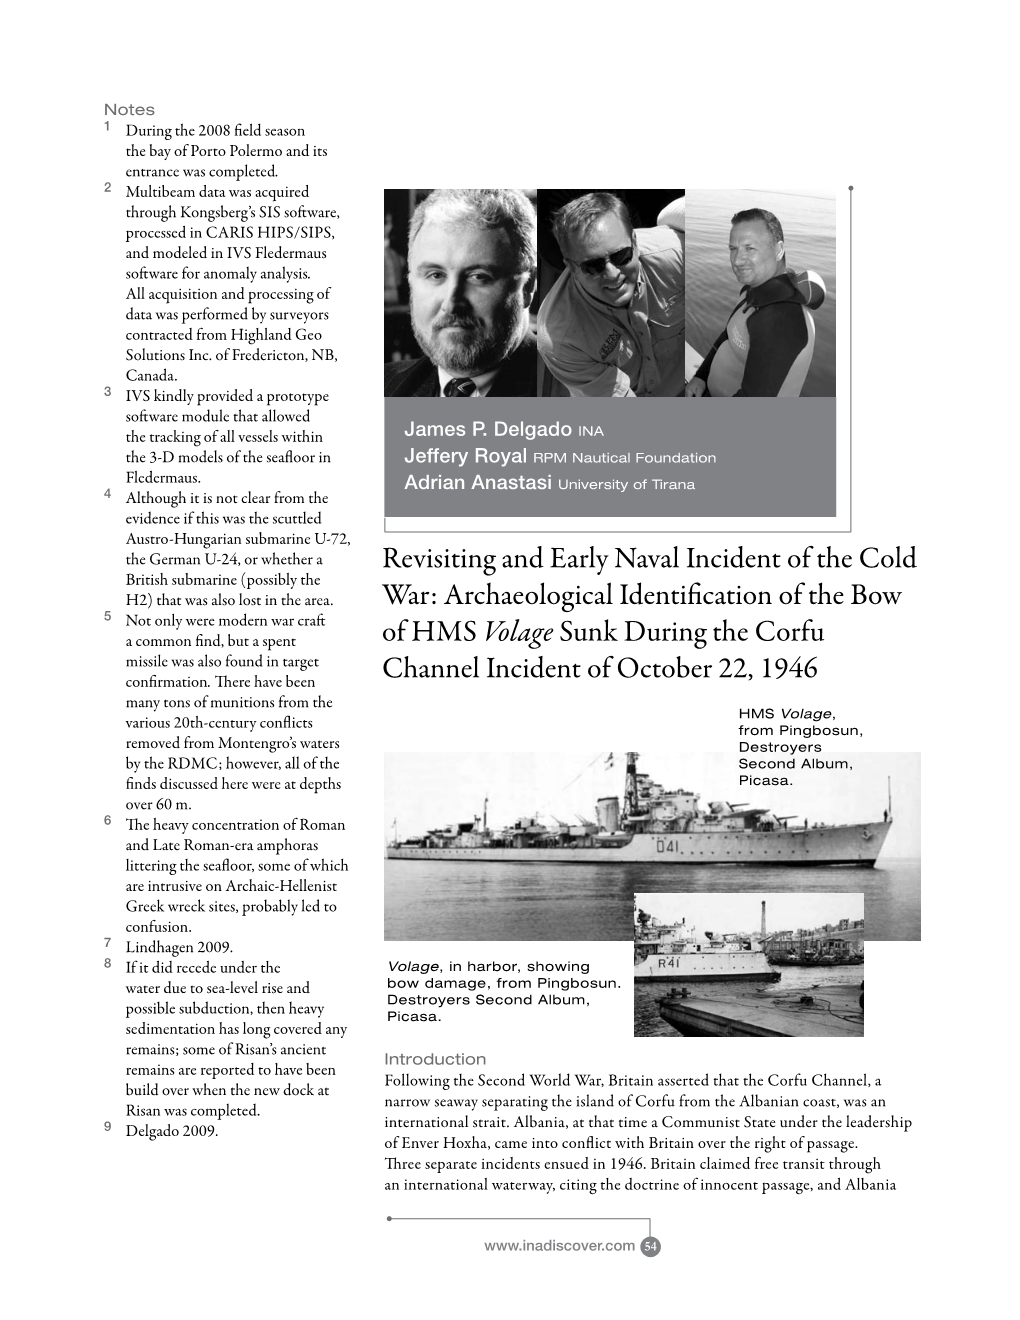 Revisiting and Early Naval Incident of the Cold War: Archaeological Identification of the Bow of HMS Volage Sunk During the Corf